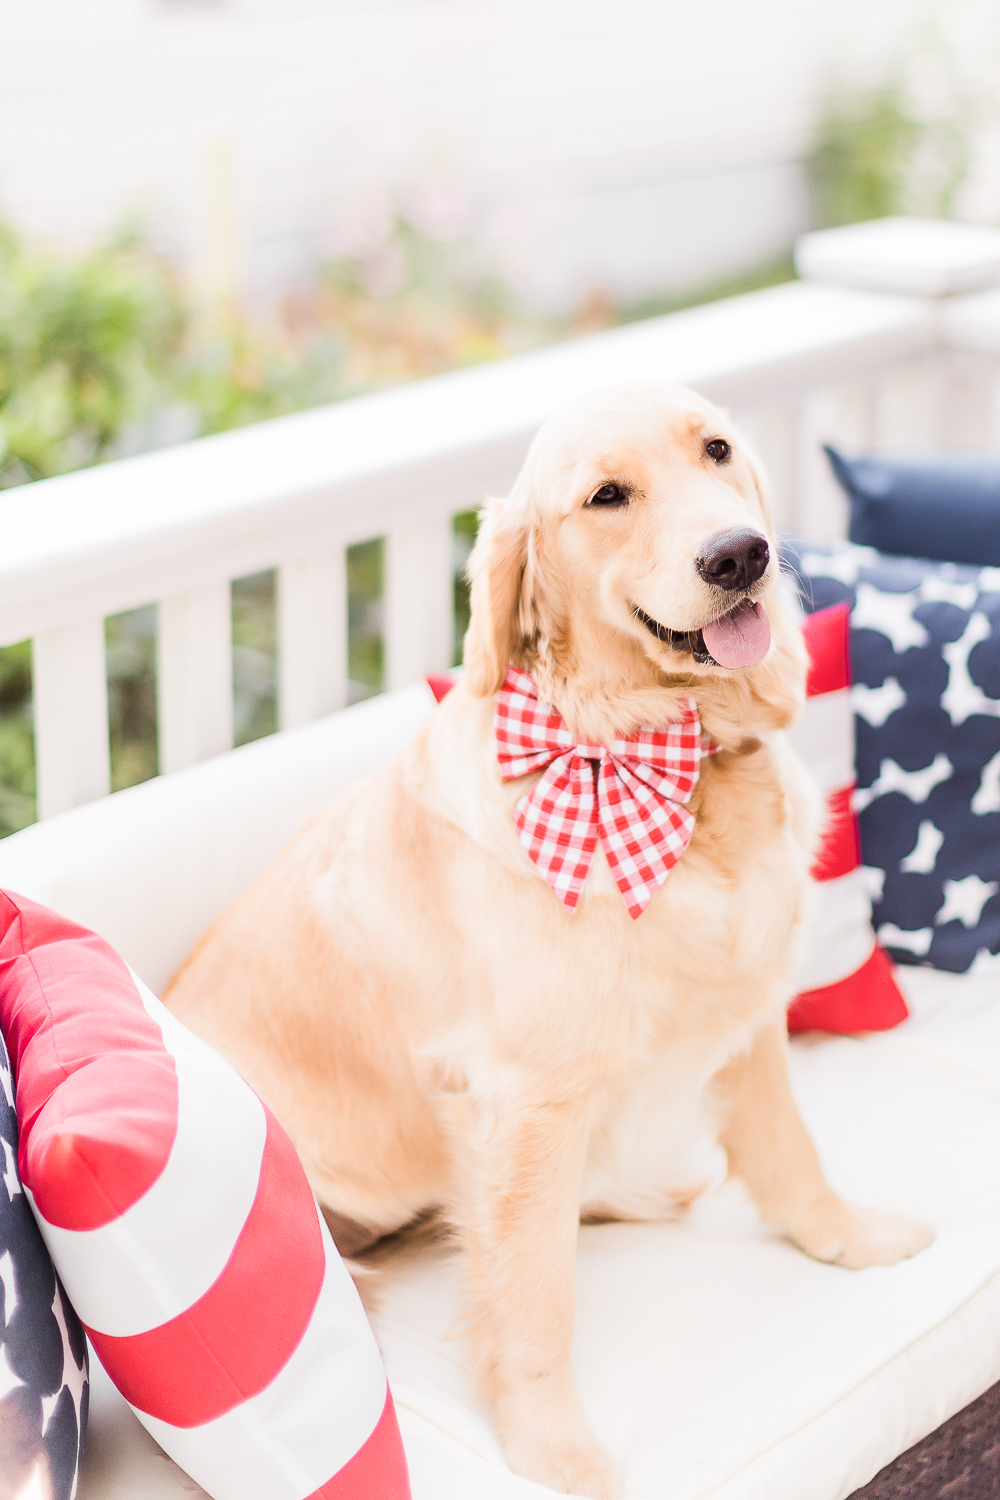 Best of July: The Top 10 Things I Loved in June 2019 by popular midwest lifestyle blogger Stephanie Ziajka from Diary of a Debutante, cute golden retriever puppy on 4th of July, red gingham dog bow, 4th of July patio decor